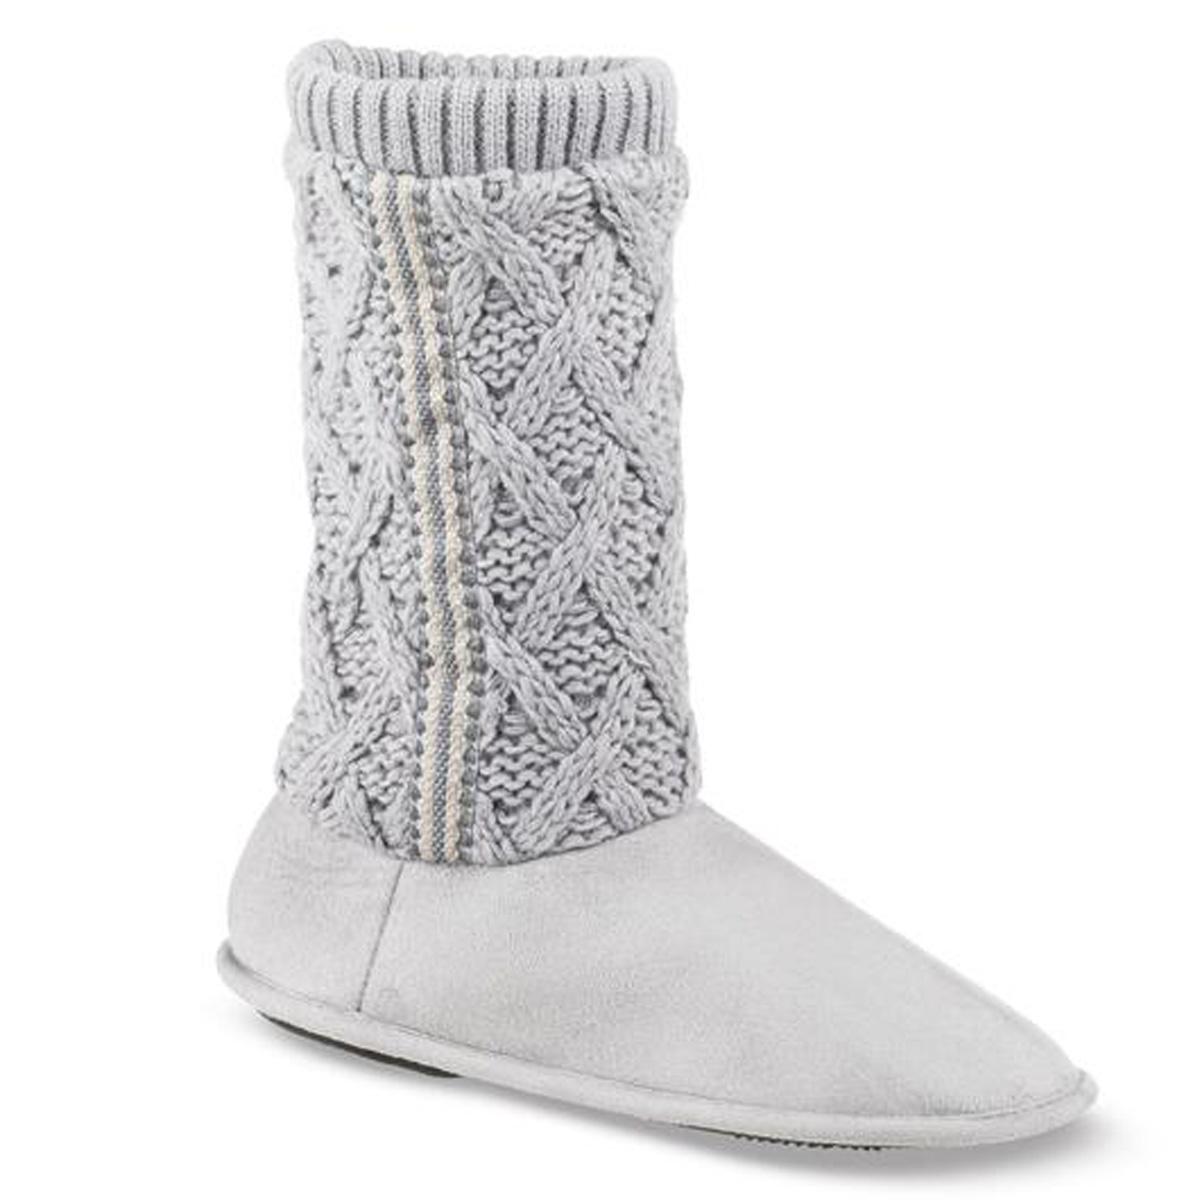 Womens Tessa Knit Tall Bootie Slippers for $10.50 Shipped